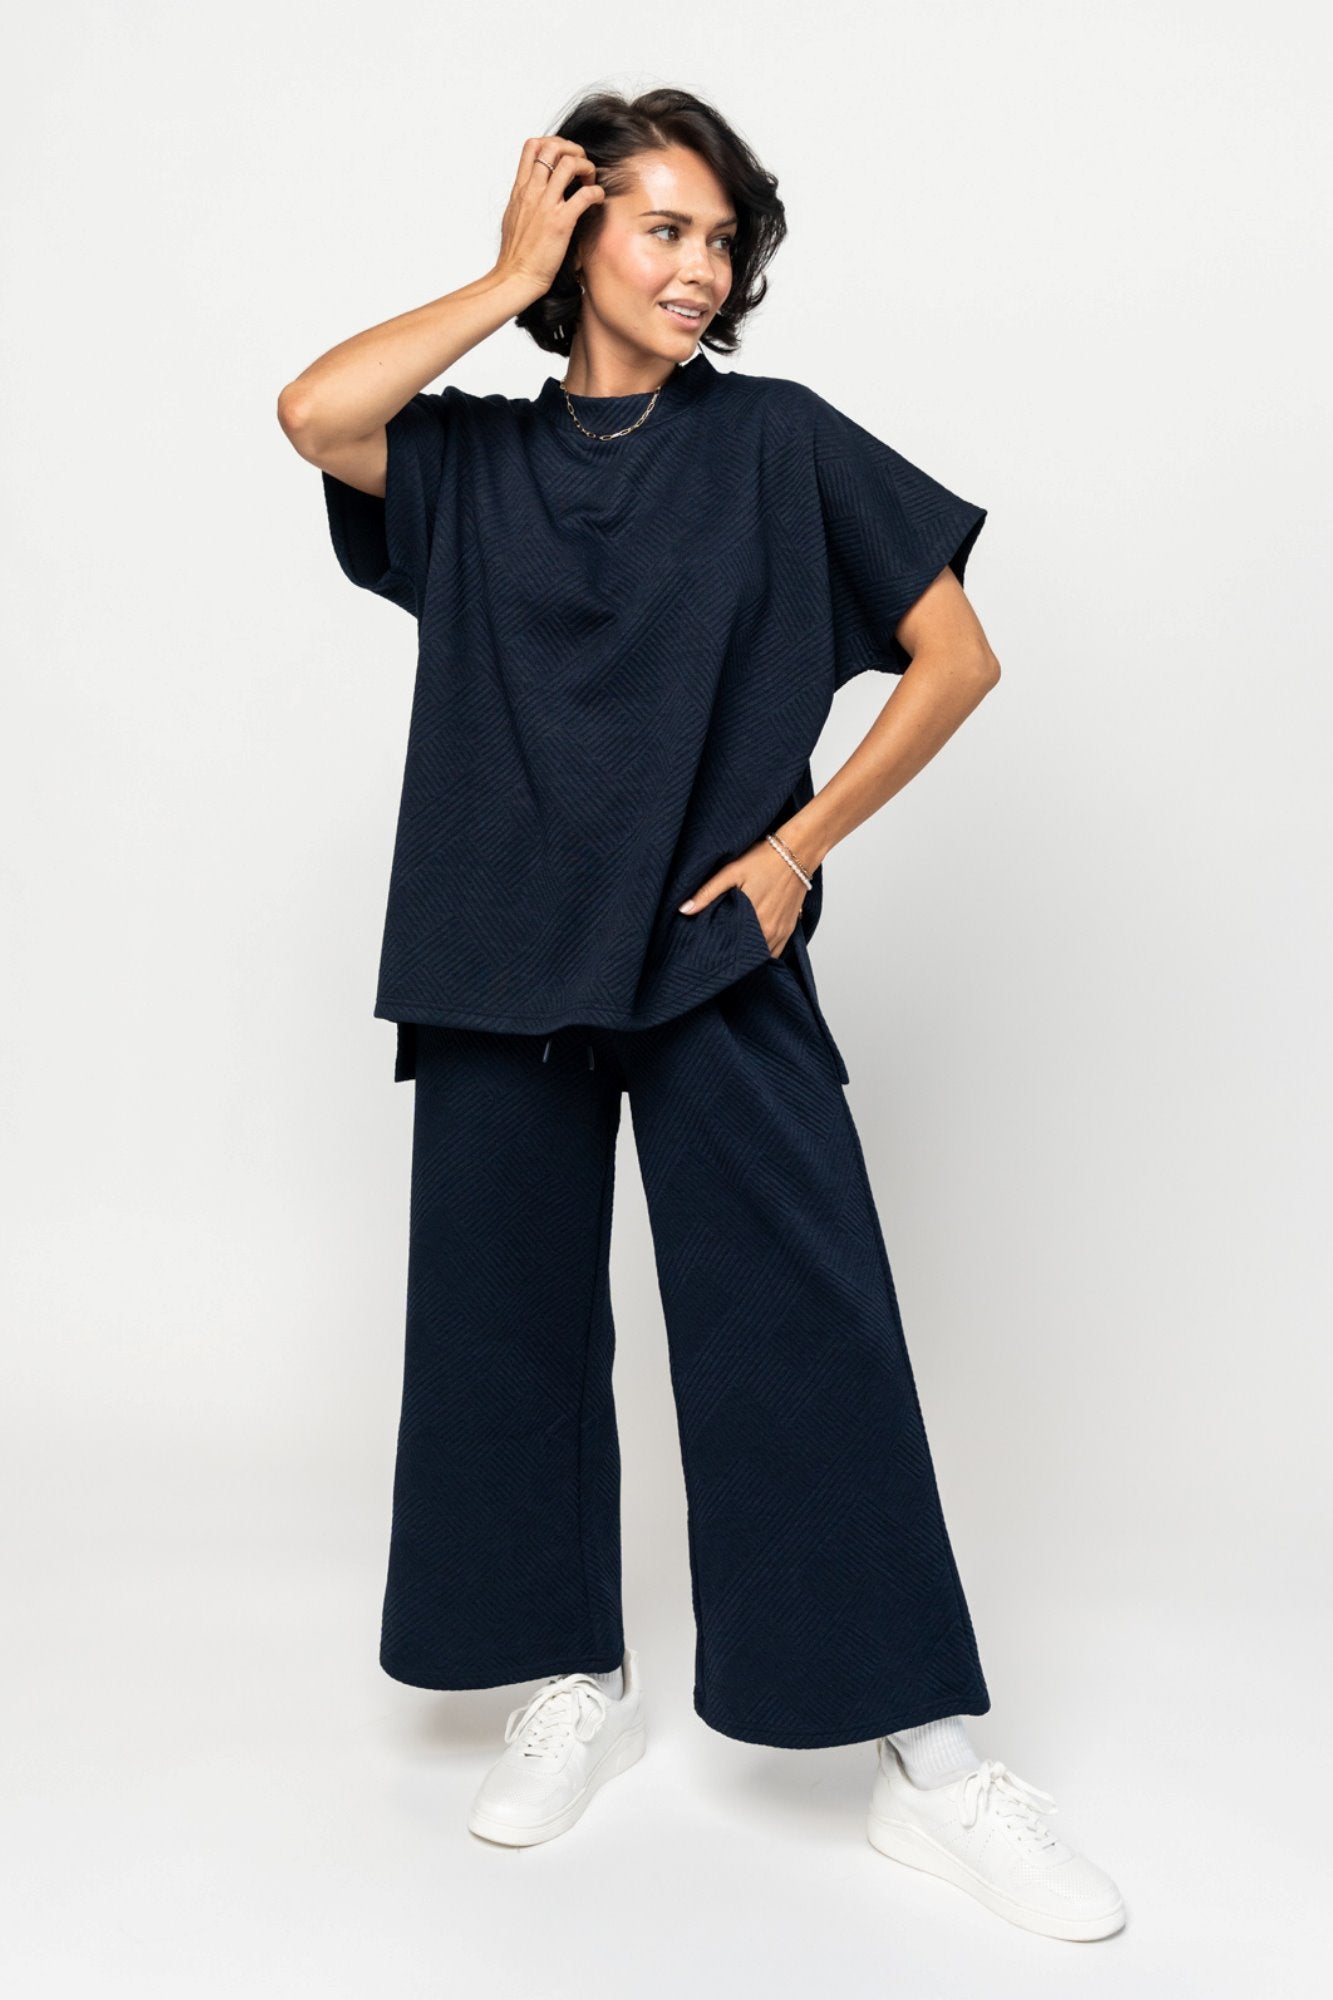 Addison Pants in Navy Holley Girl 